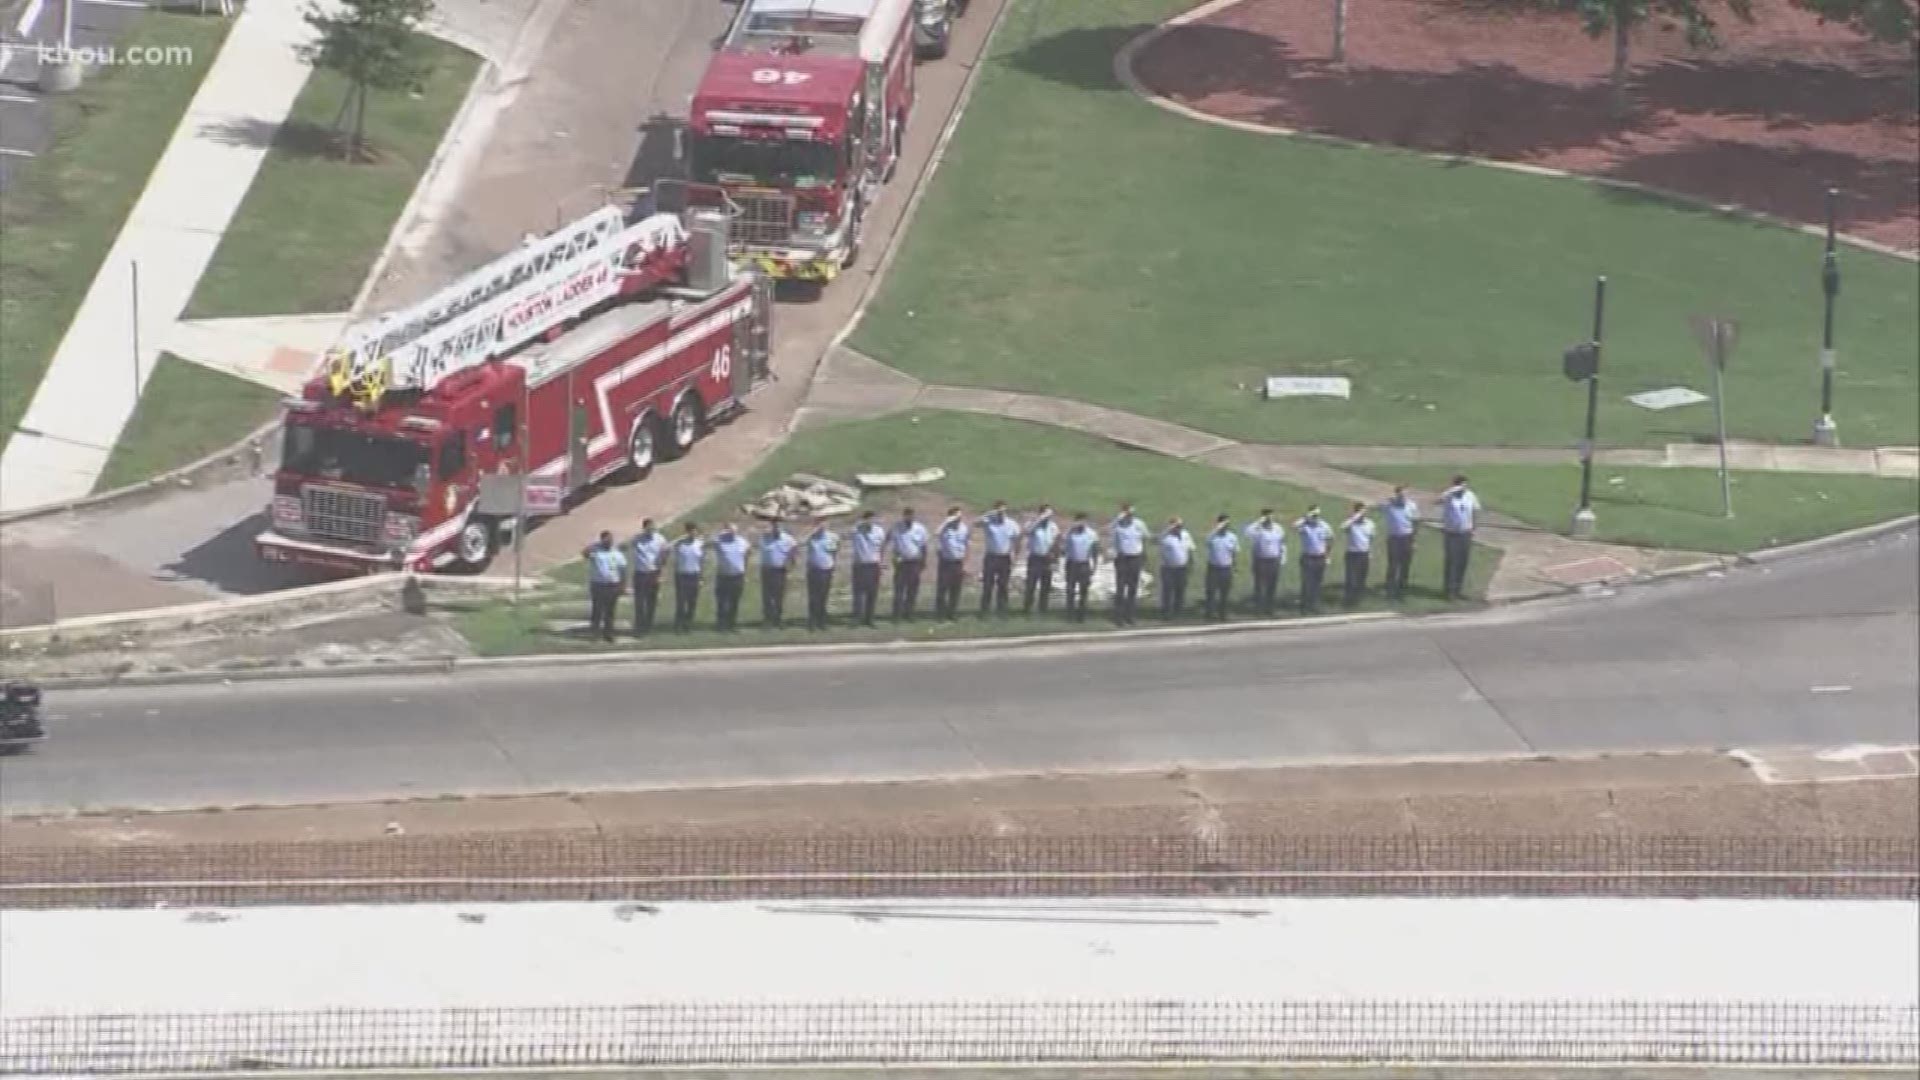 A solemn procession from Houston to Tomball honored a firefighter who died over the weekend. Kenneth Stavinoha, 36, collapsed outside Station 27 after a heart attack